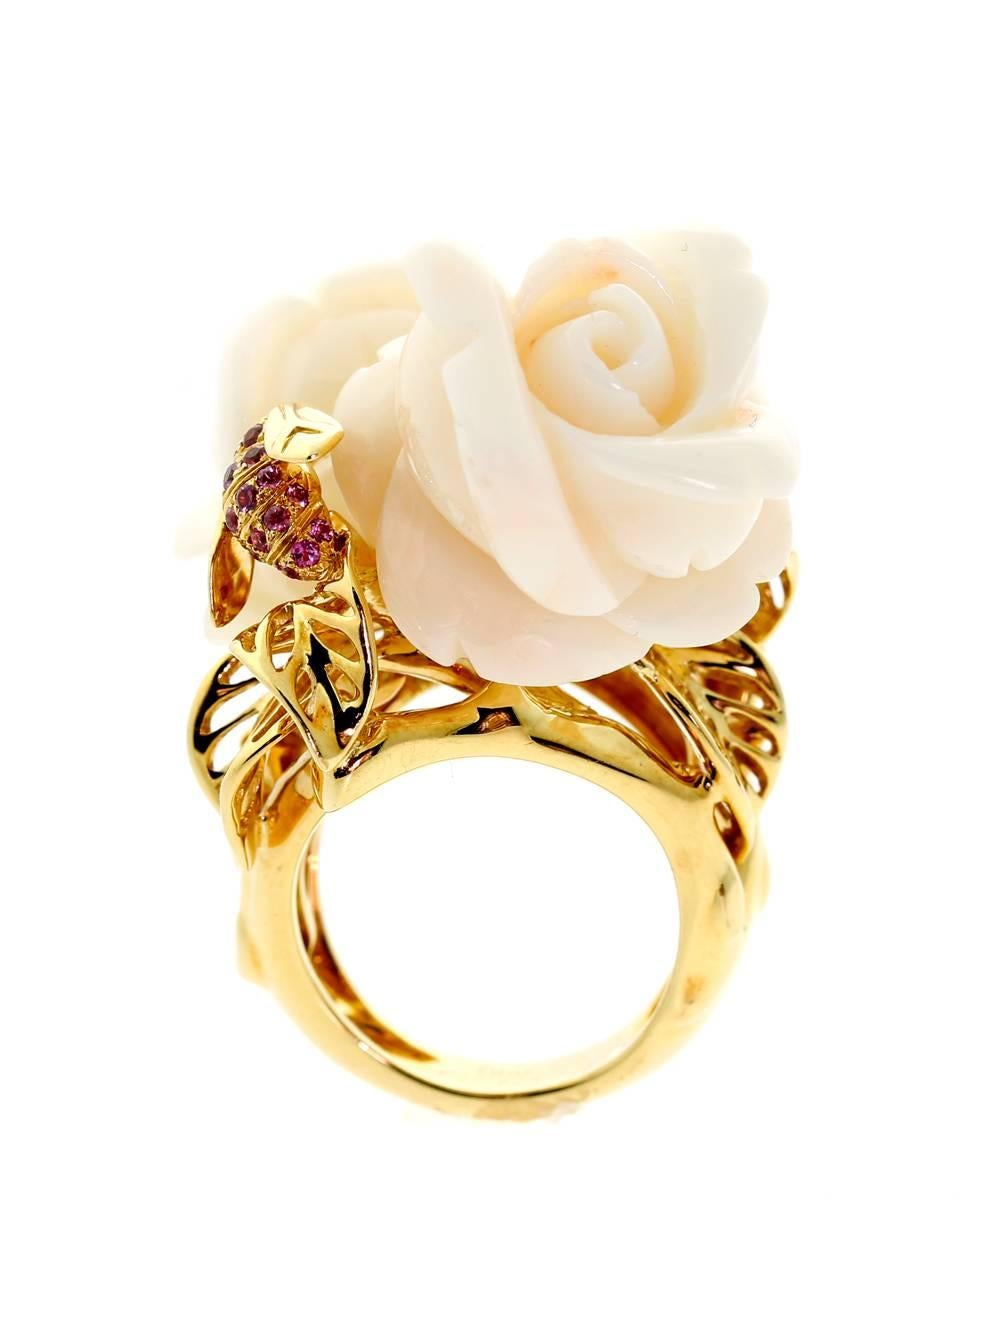 Drawing inspiration from Dior's favorite flower this Pré Catelan collection coral ring presents jewels of crystallised roses, like a bouquet of eternal flowers. Crafted in 18k yellow gold, featuring pink sapphire, diamond, and coral.

Size